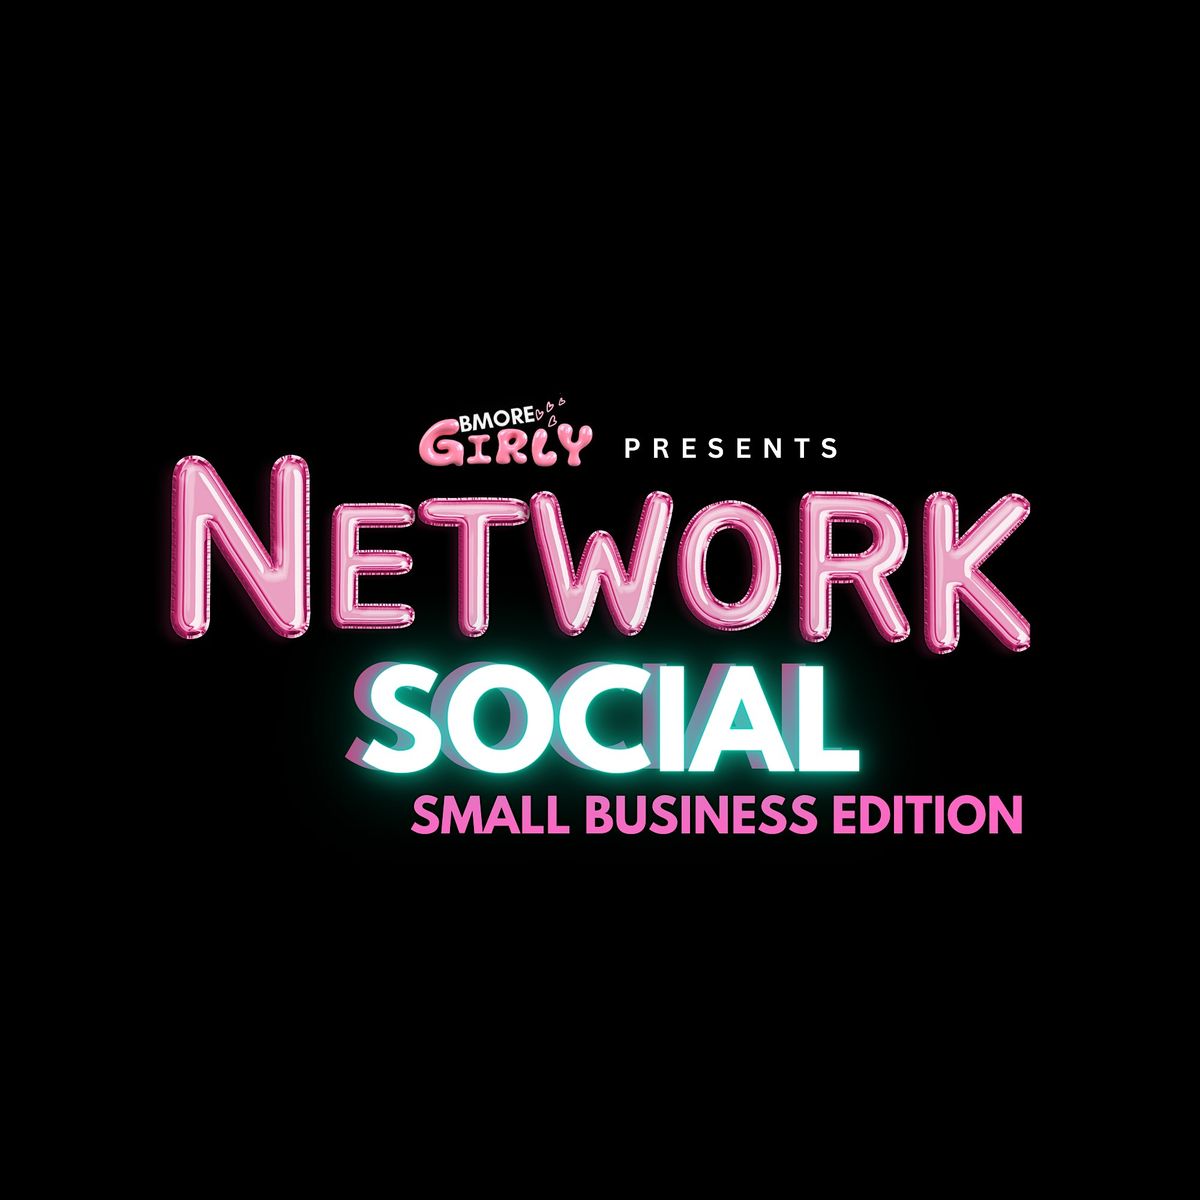 BMORE GIRLY NETWORK SOCIAL:  SMALL BUSINESS EDITION